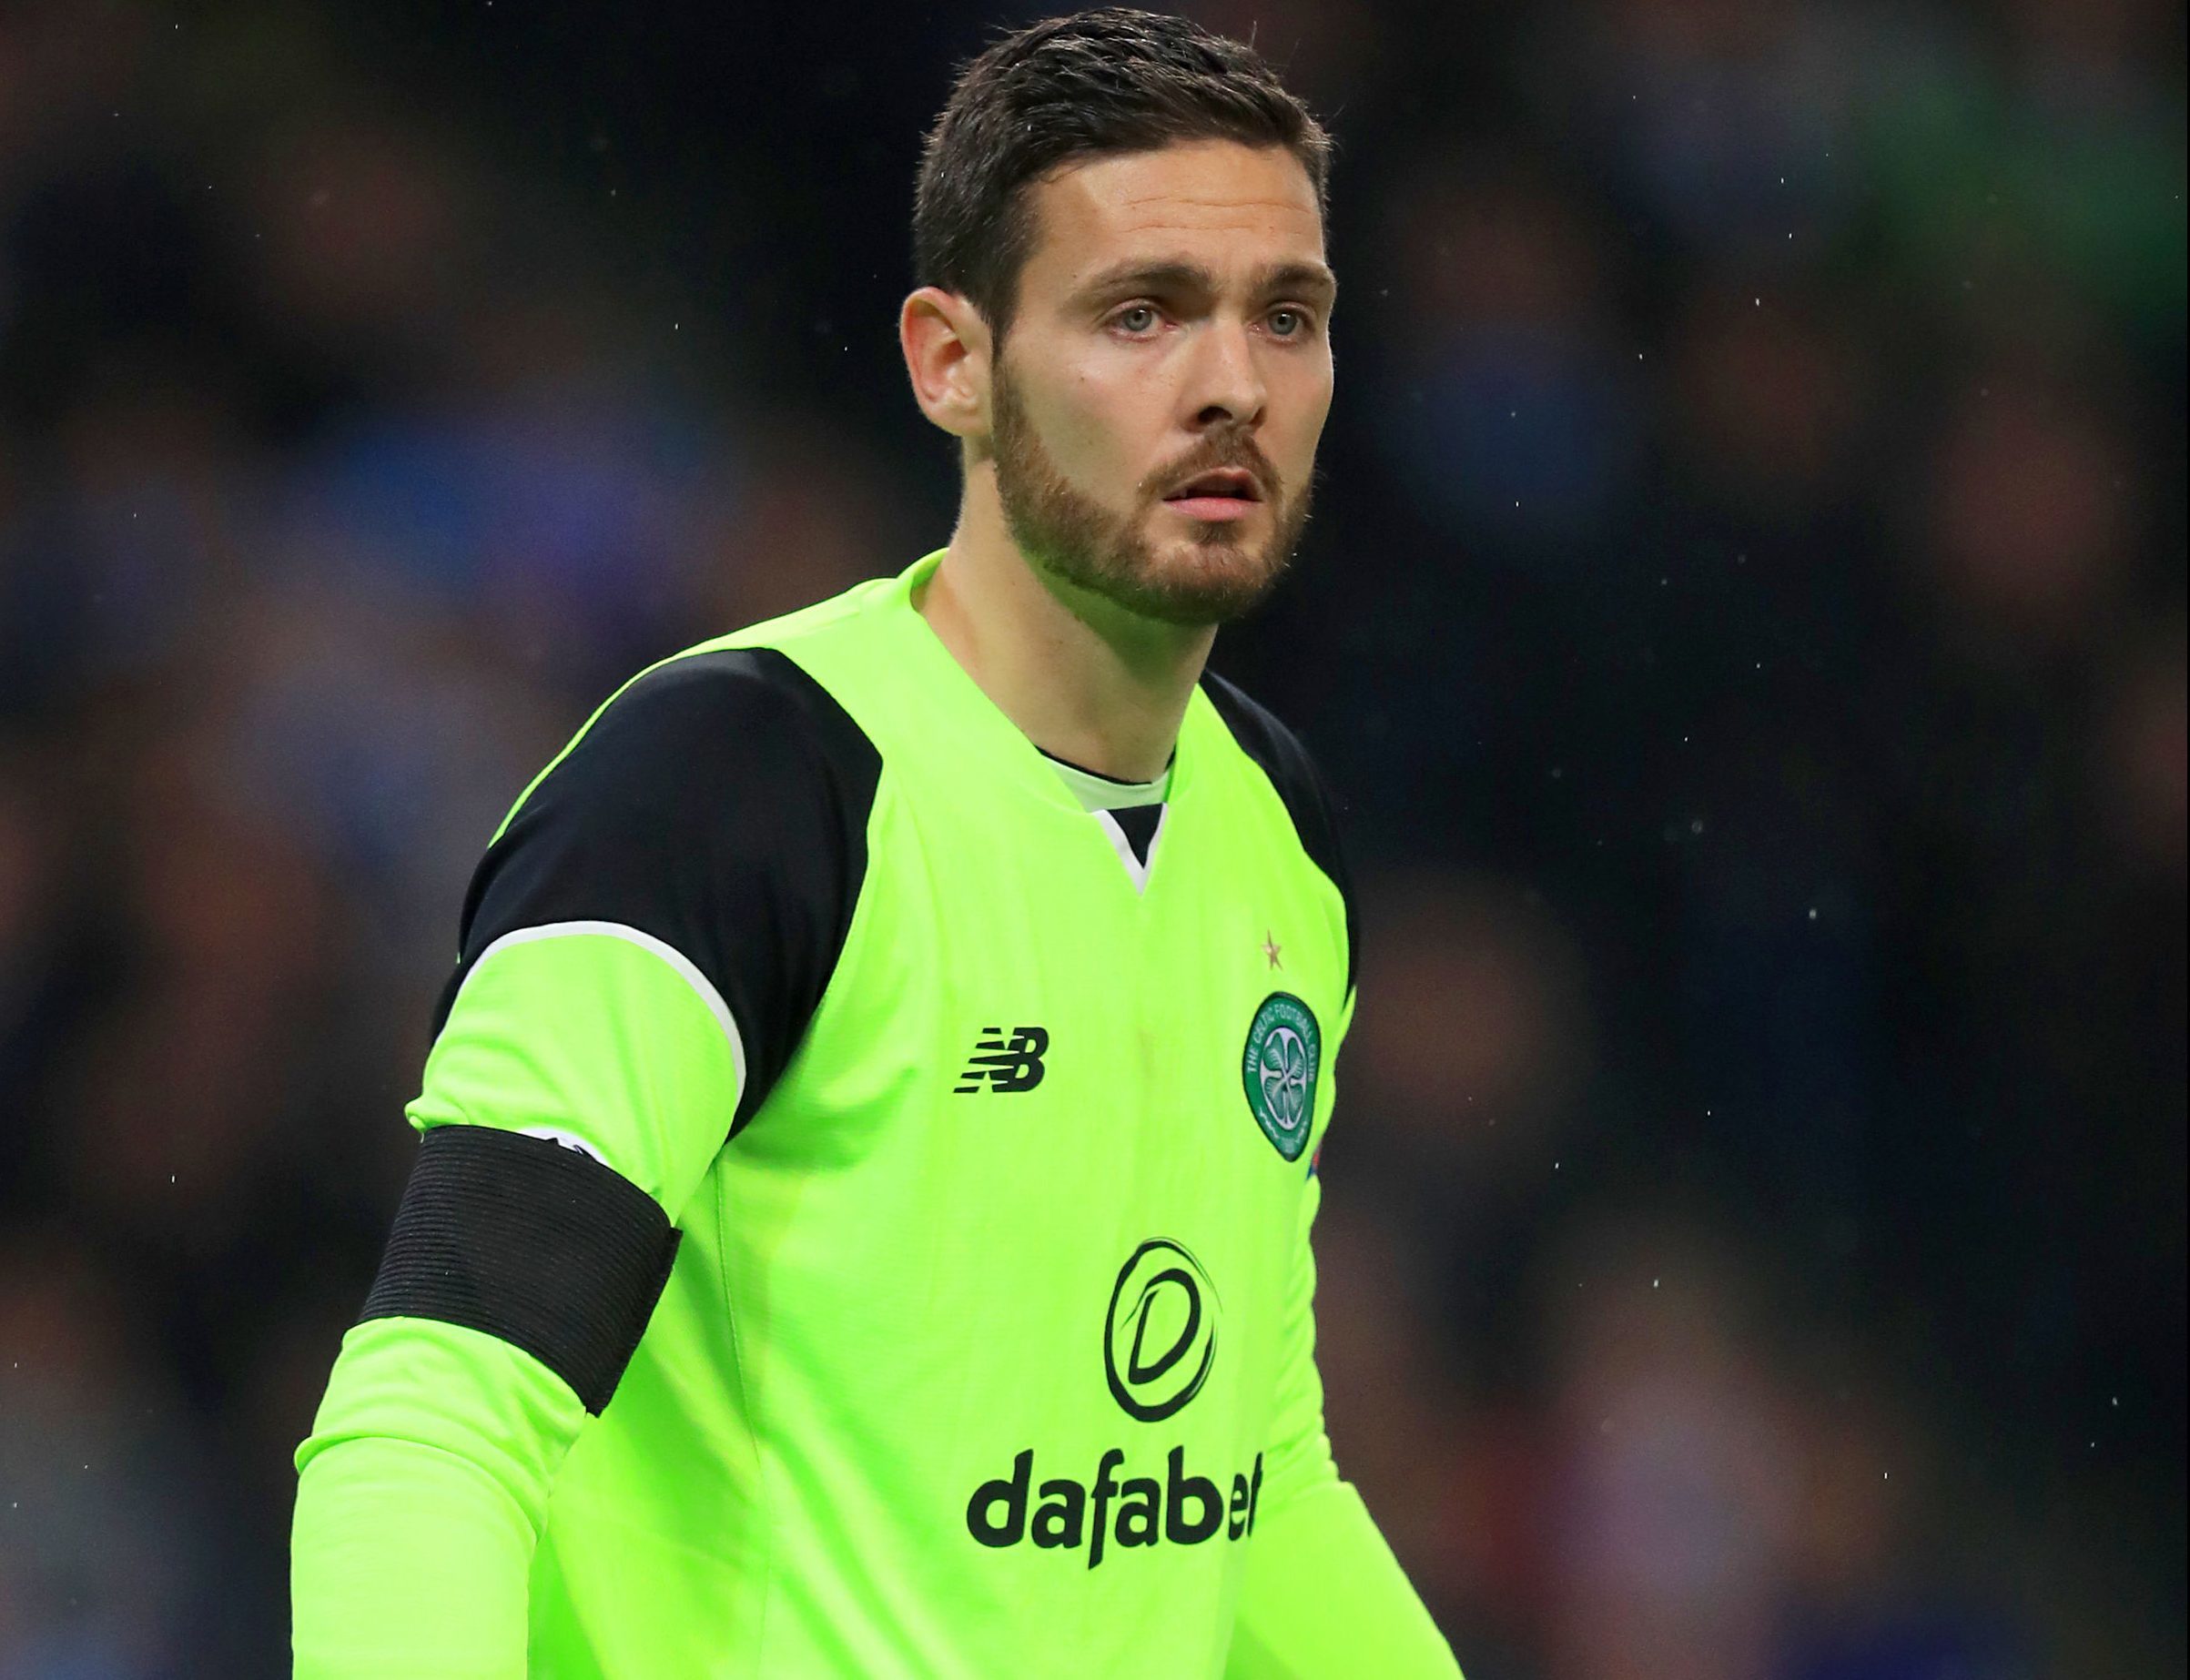 Celtic manager Brendan Rodgers told Chelsea they were wasting their time pursuing goalkeeper Craig Gordon only to see the Premier League leaders linked with his top goalscorer (Mike Egerton/PA Wire)